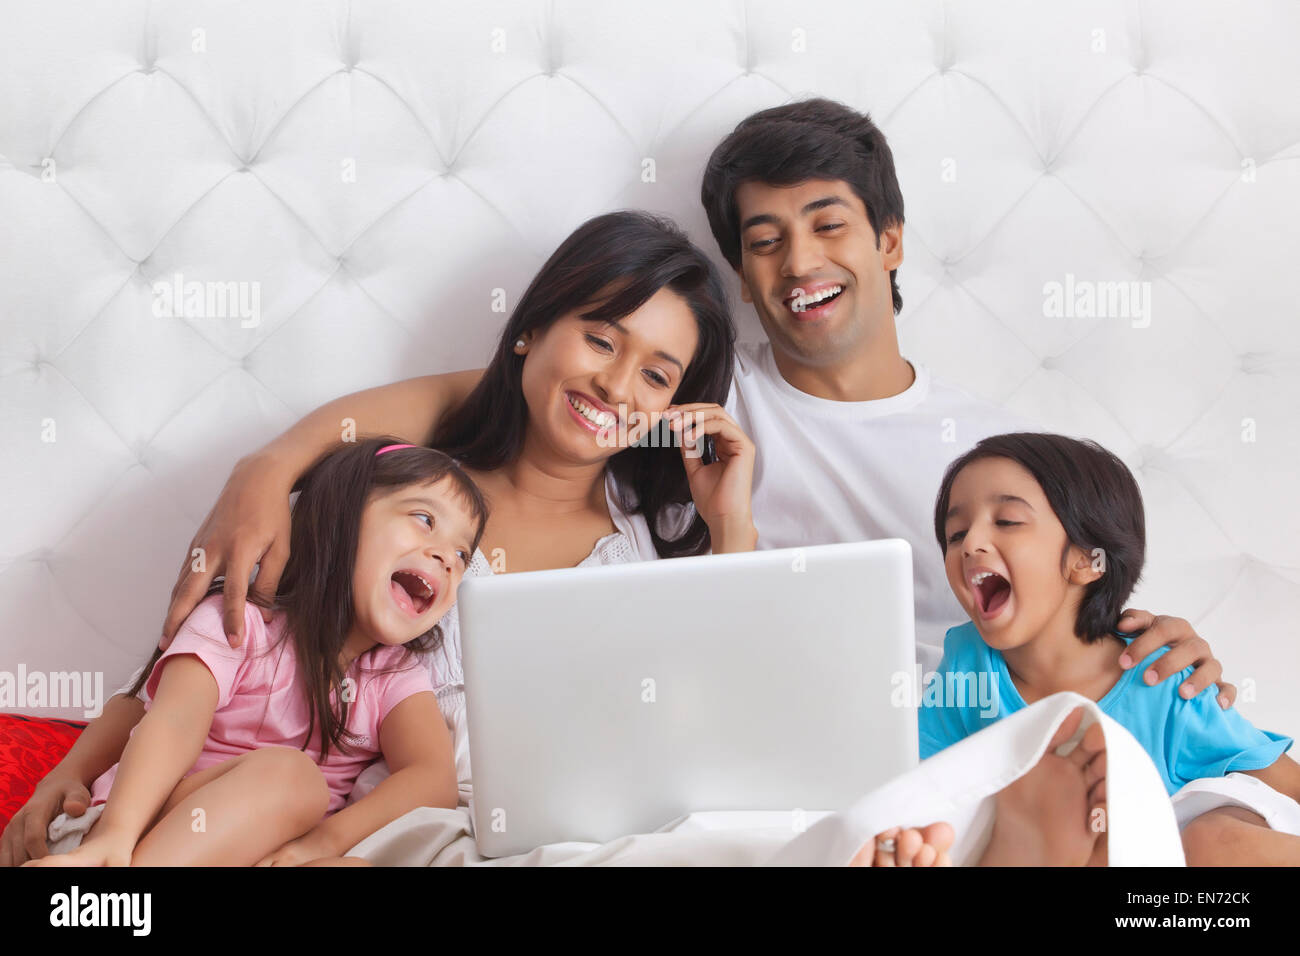 Family looking at laptop and laughing Stock Photo